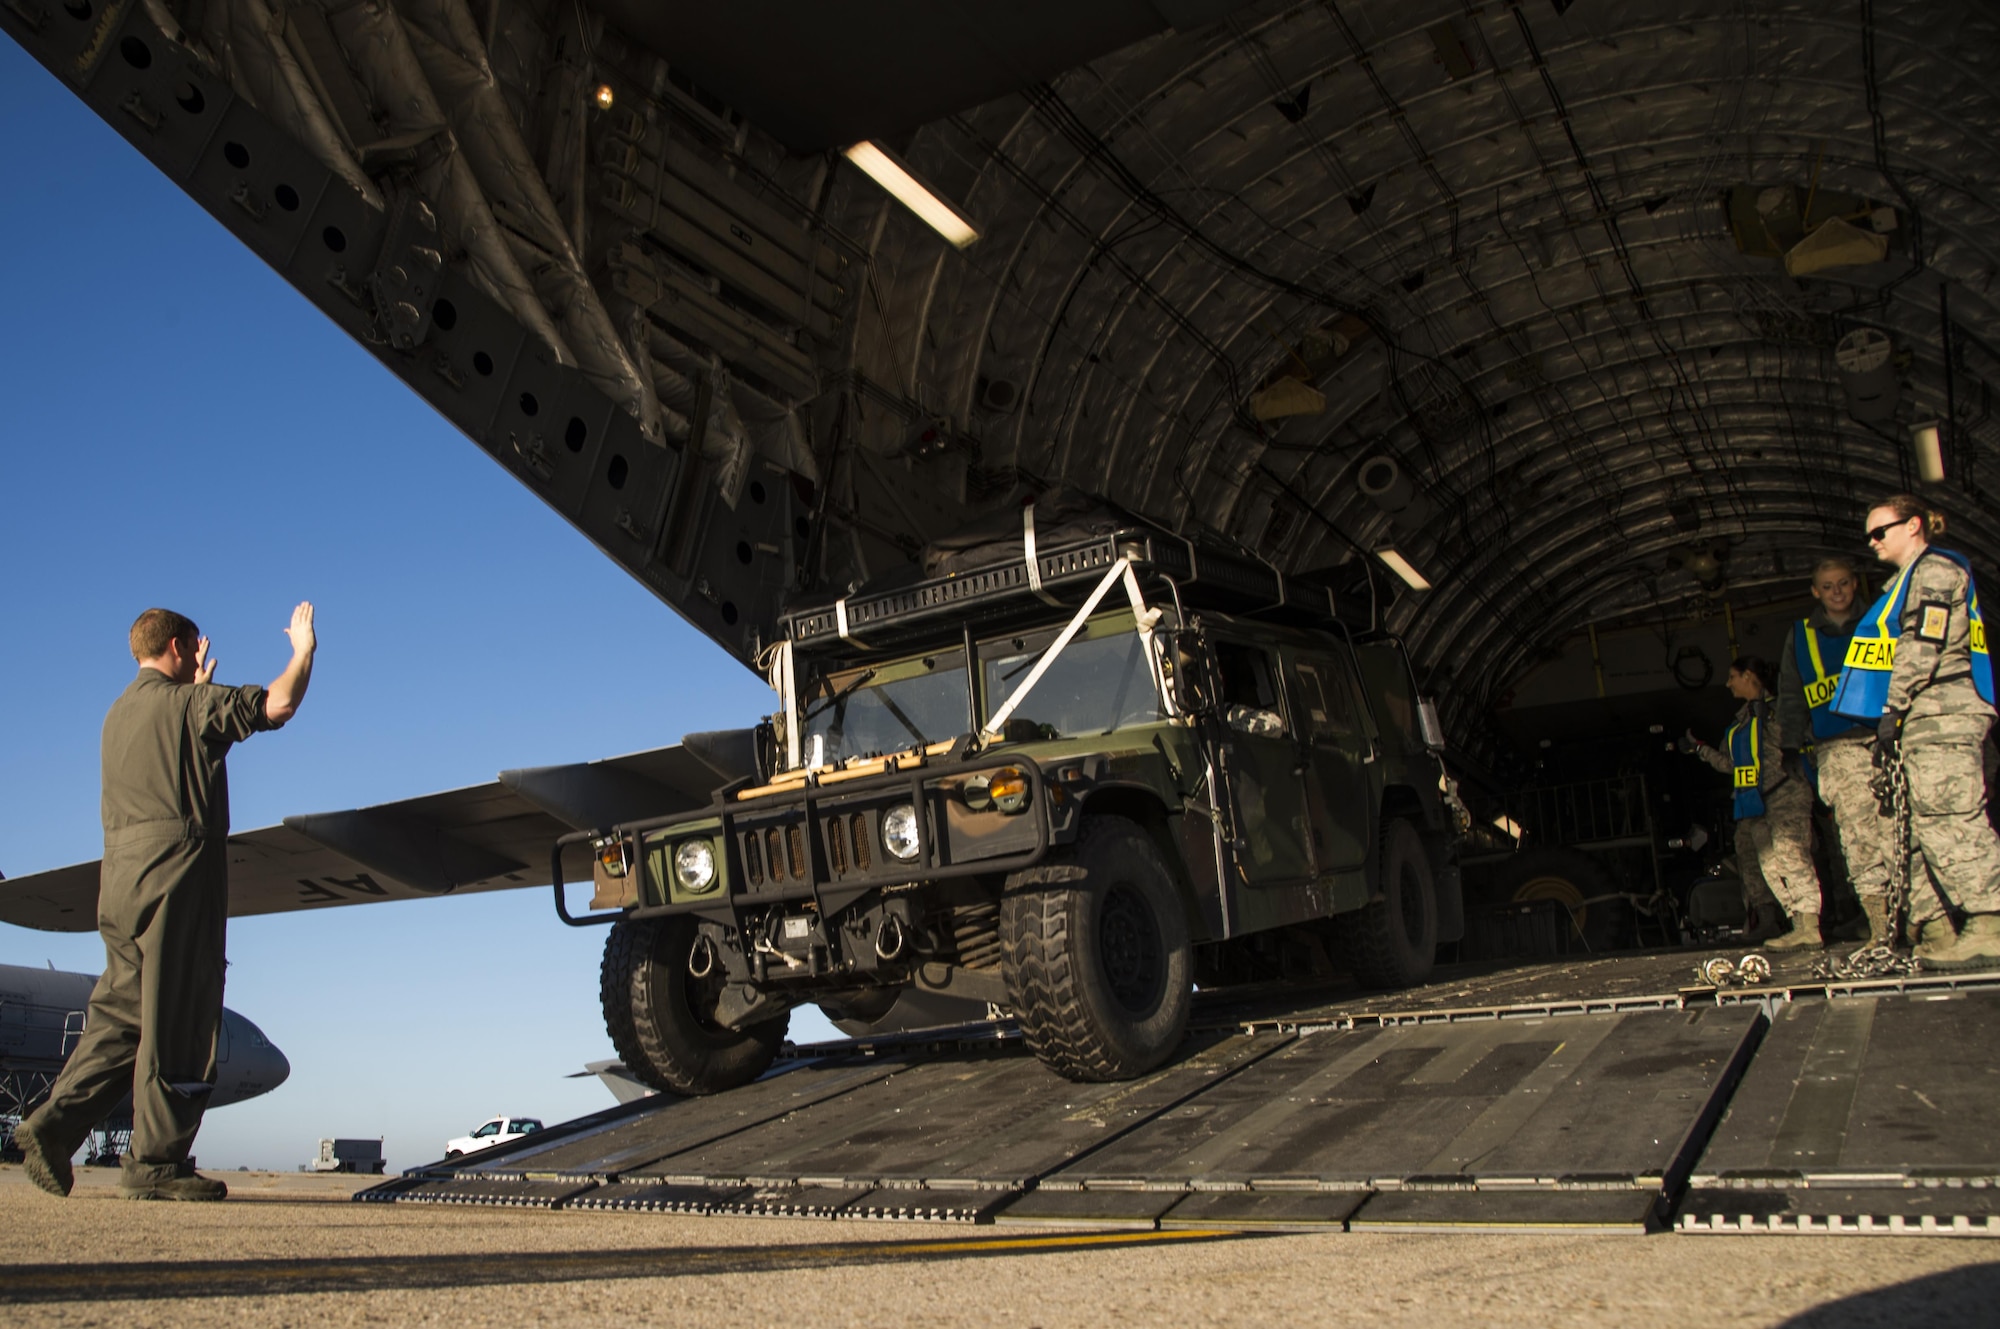 U.S. Air Force aerial porters assigned to the 305th Aerial Port Squadron load a Humvee onto a C-17 Globemaster III at Joint Base McGuire-Dix-Lakehurst, N.J., October 6, 2016. The Humvee, along with other equipment and more than 30 members of the 621st Contingency Response Wing will be on their way to Port-au-Prince, Haiti in response to Hurricane Matthew. The CRW is highly-specialized in rapidly deploying personnel to quickly open airfields and establish, expand, sustain, and coordinate air mobility operations alongside joint and intra-agency partners. (U.S. Air Force photo by Tech. Sgt. Gustavo Gonzalez/Released)